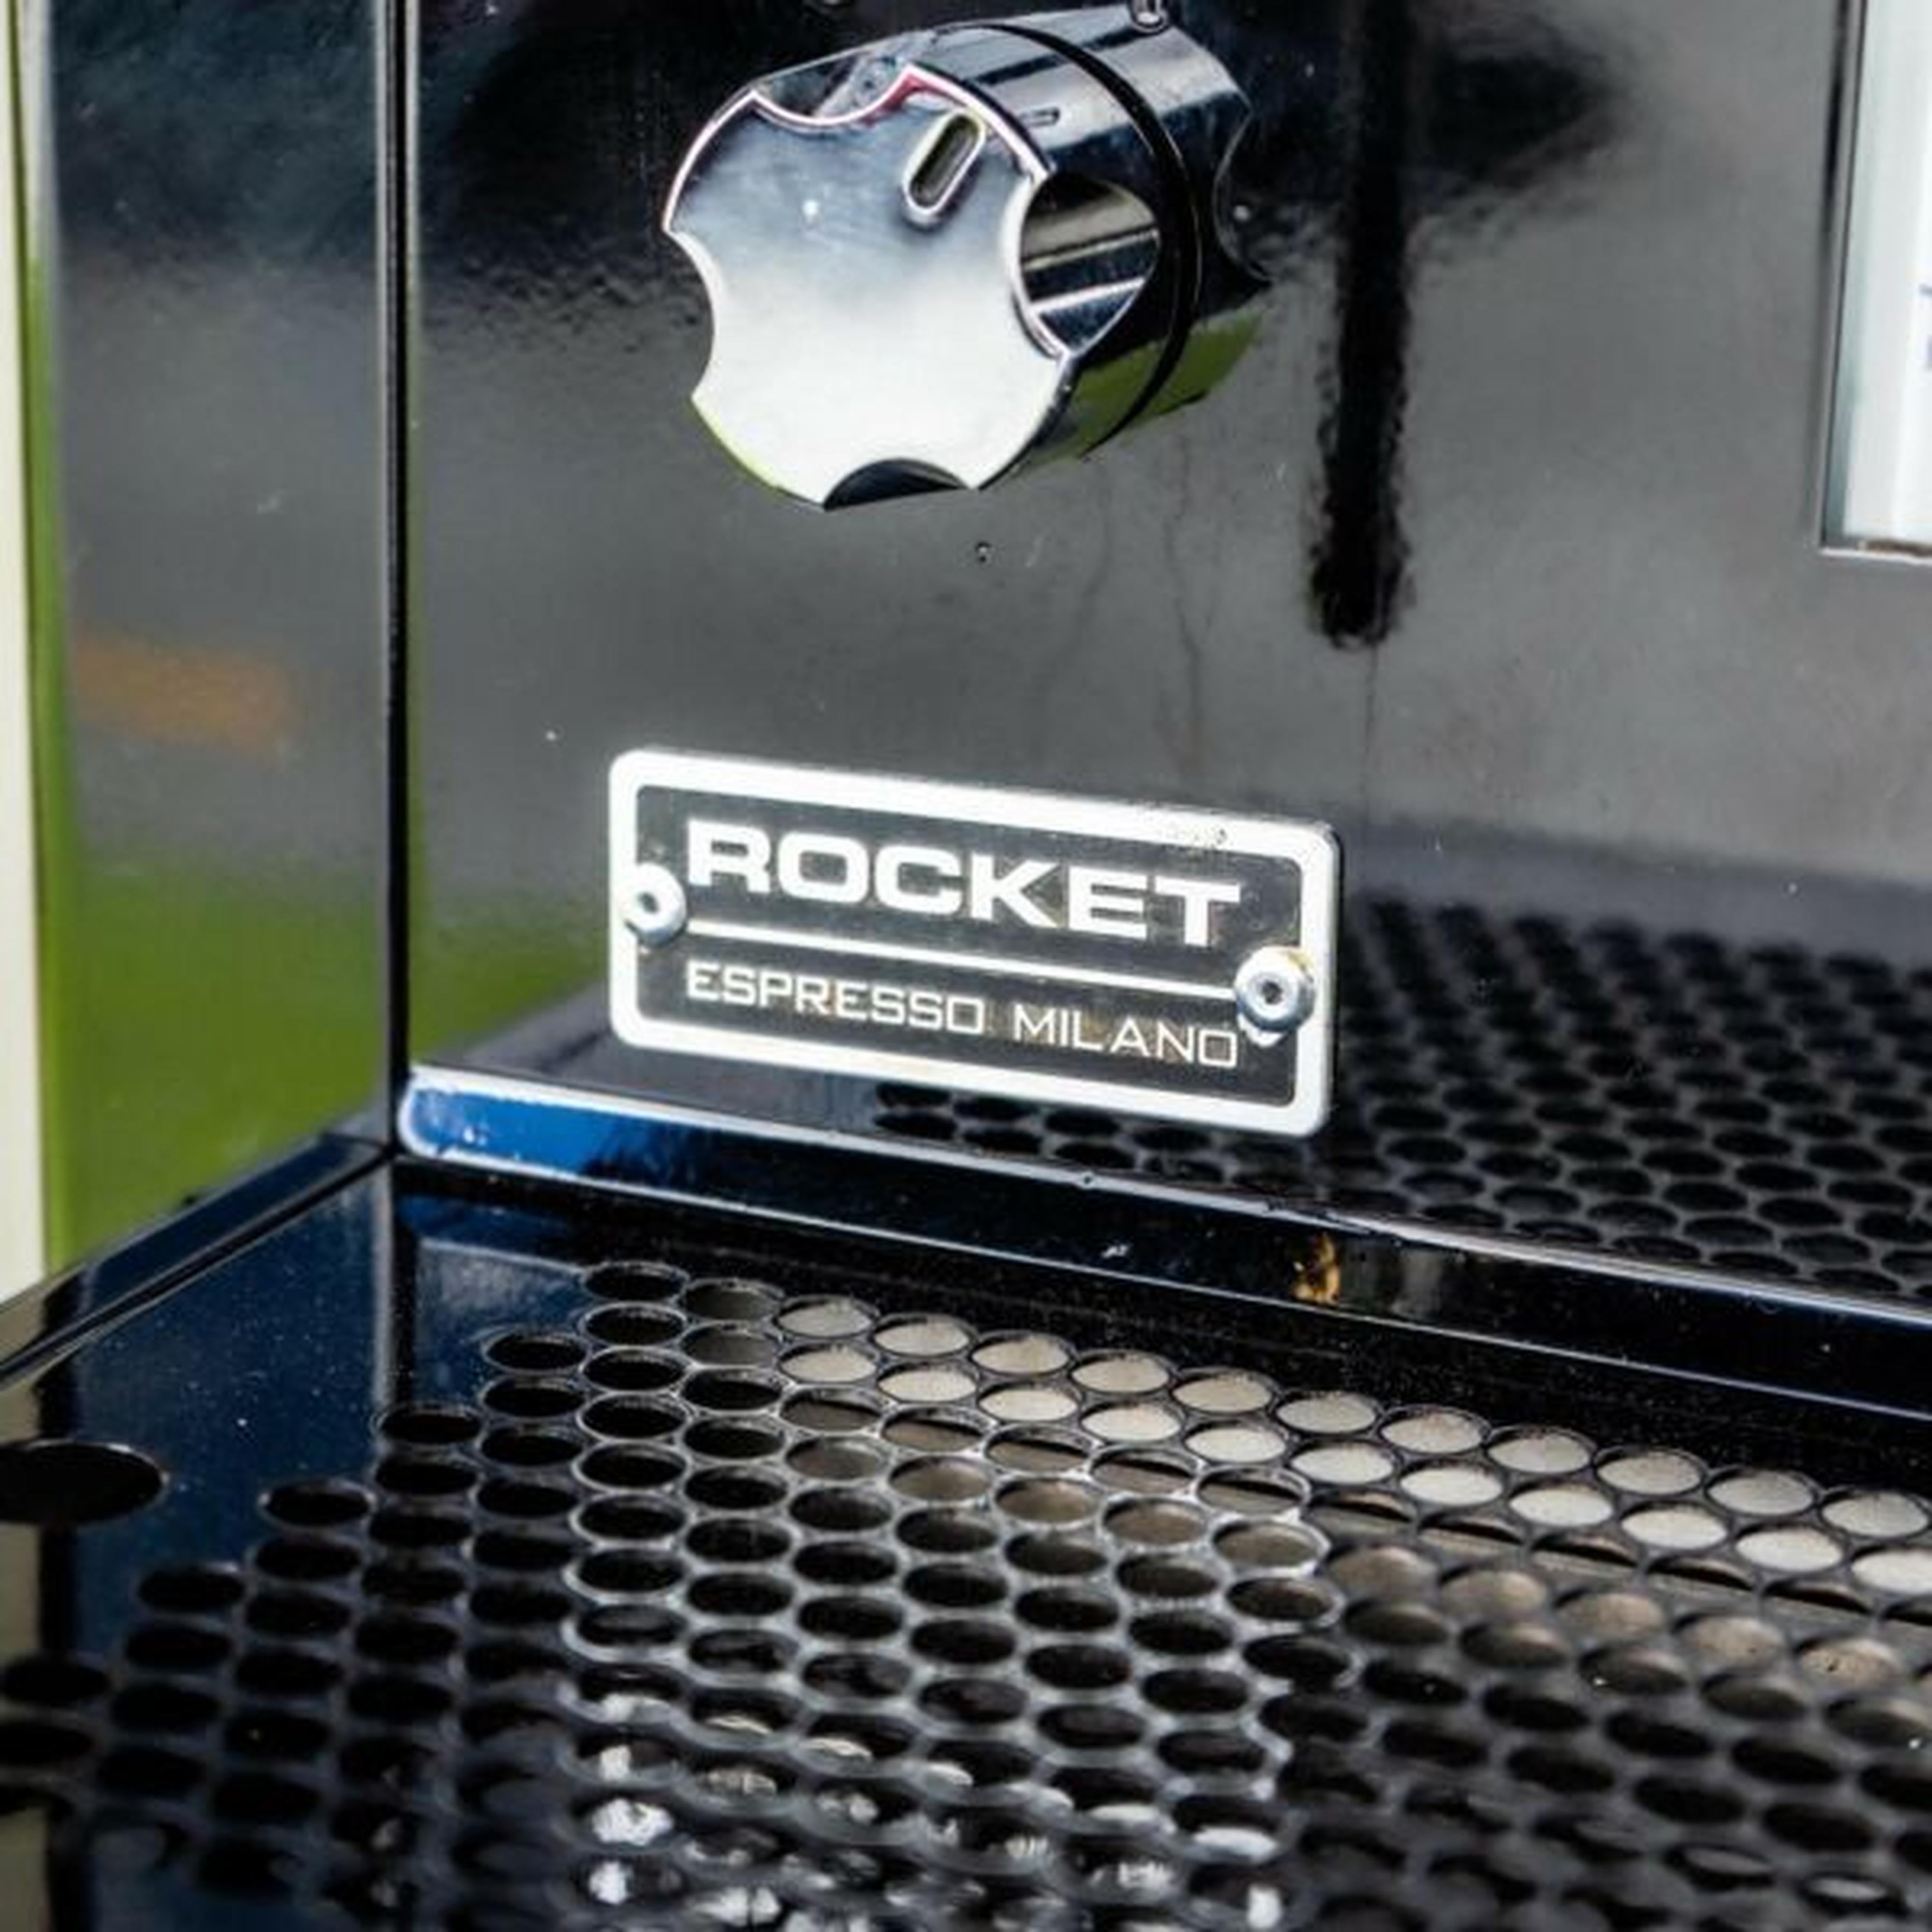 Immaculate Custom Black 3 Group Rocket Rea Commercial Coffee Machine